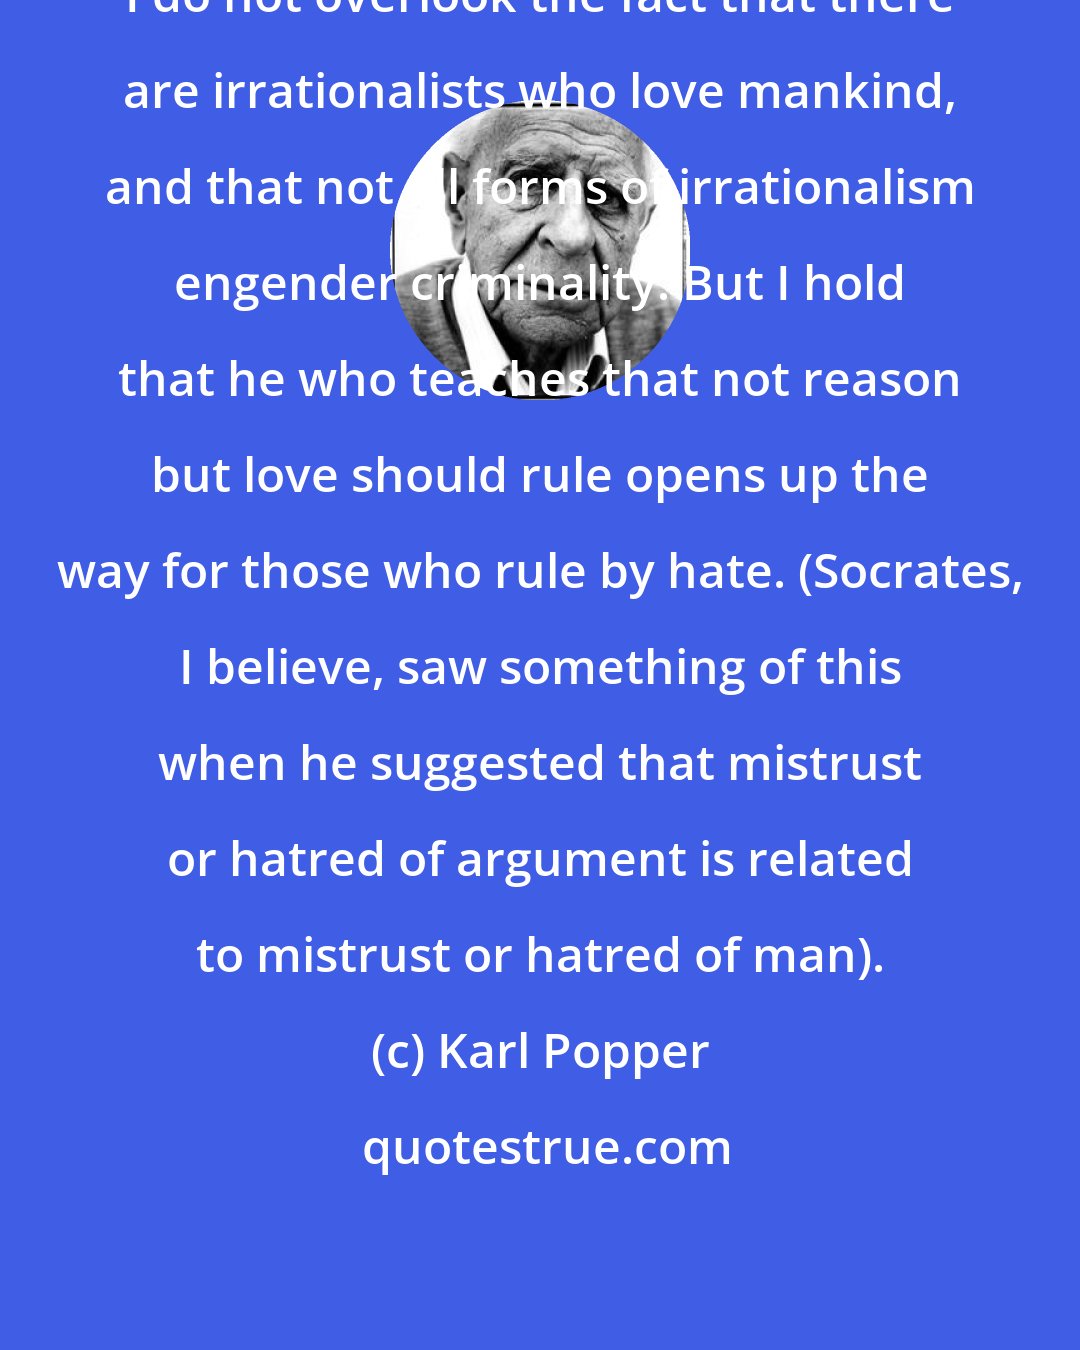 Karl Popper: I do not overlook the fact that there are irrationalists who love mankind, and that not all forms of irrationalism engender criminality. But I hold that he who teaches that not reason but love should rule opens up the way for those who rule by hate. (Socrates, I believe, saw something of this when he suggested that mistrust or hatred of argument is related to mistrust or hatred of man).